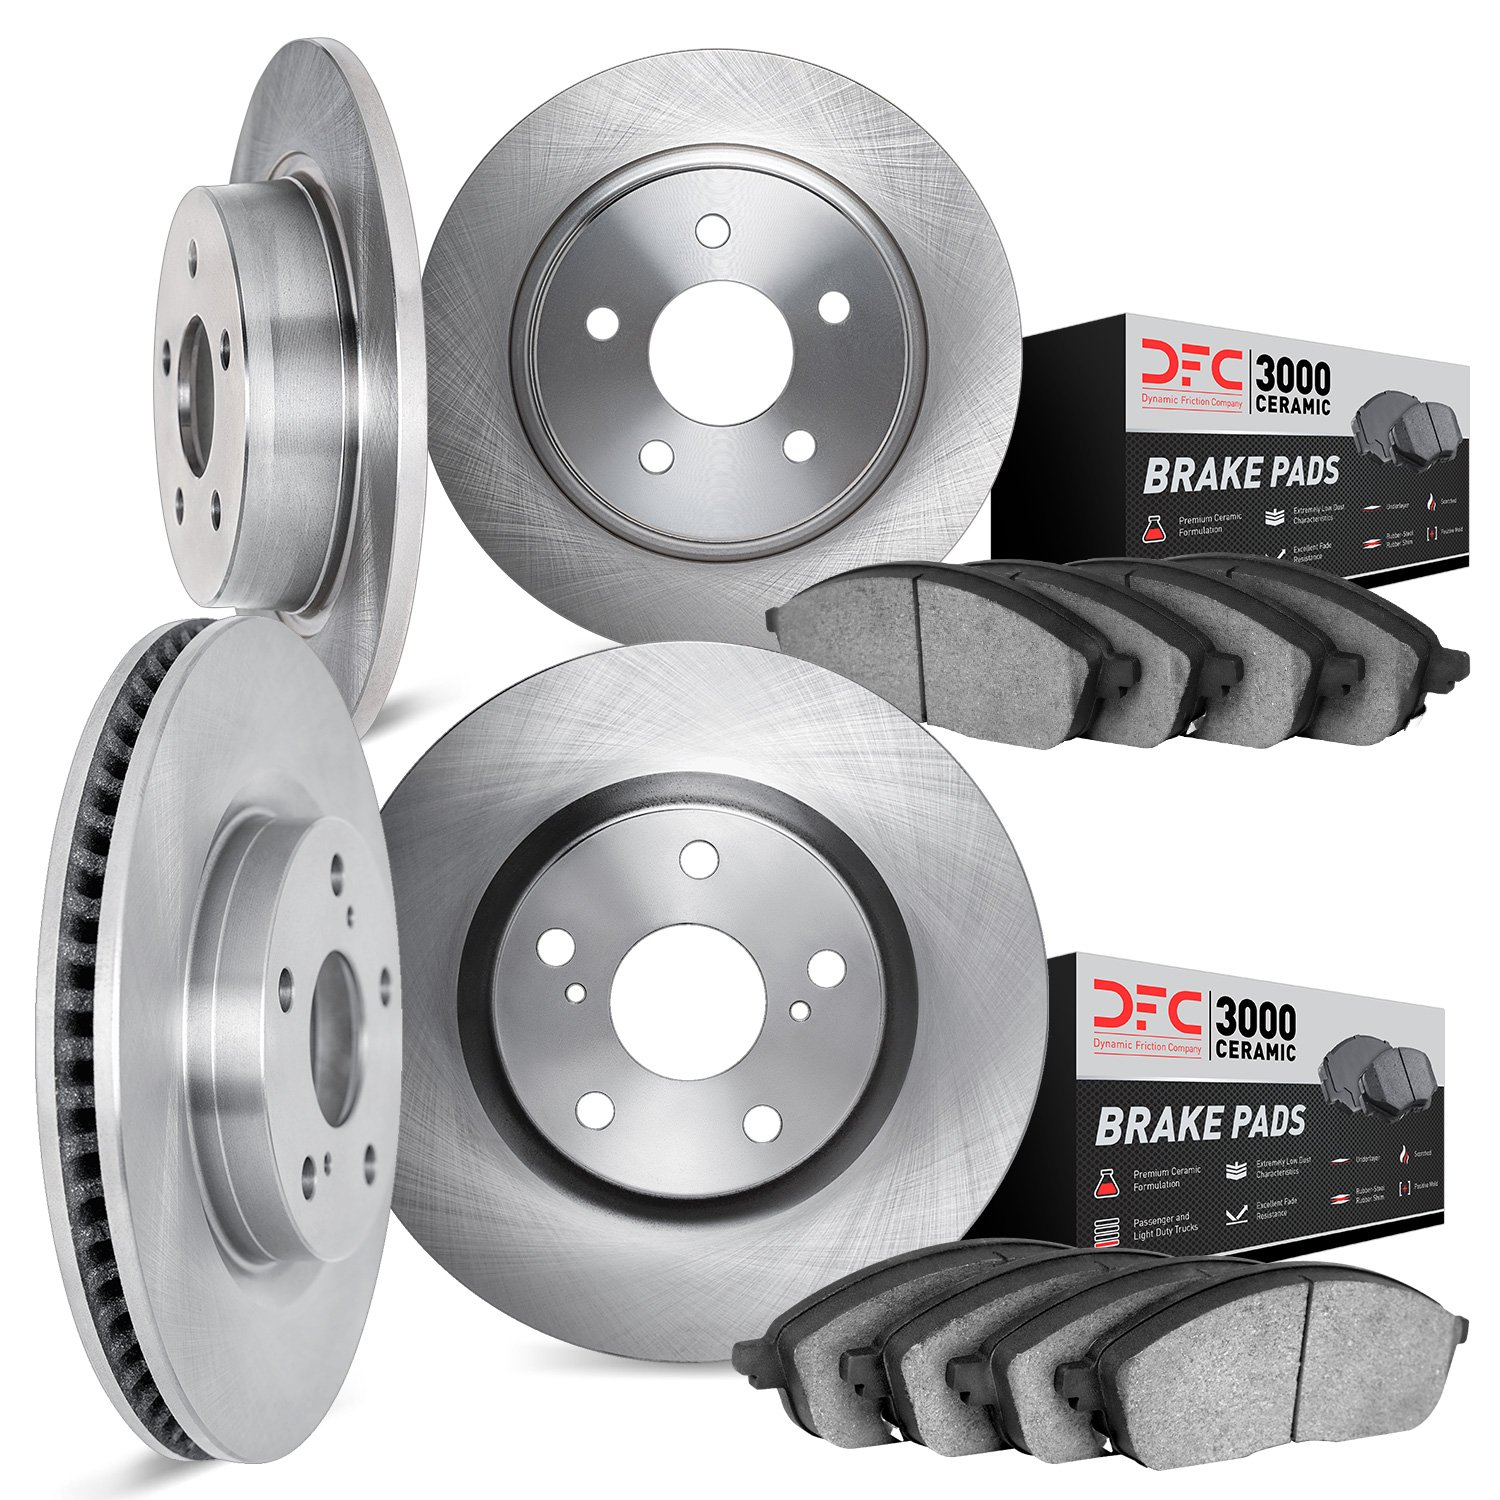 6304-41001 Brake Rotors with 3000-Series Ceramic Brake Pads Kit, 1998-1998 Mopar, Position: Front and Rear